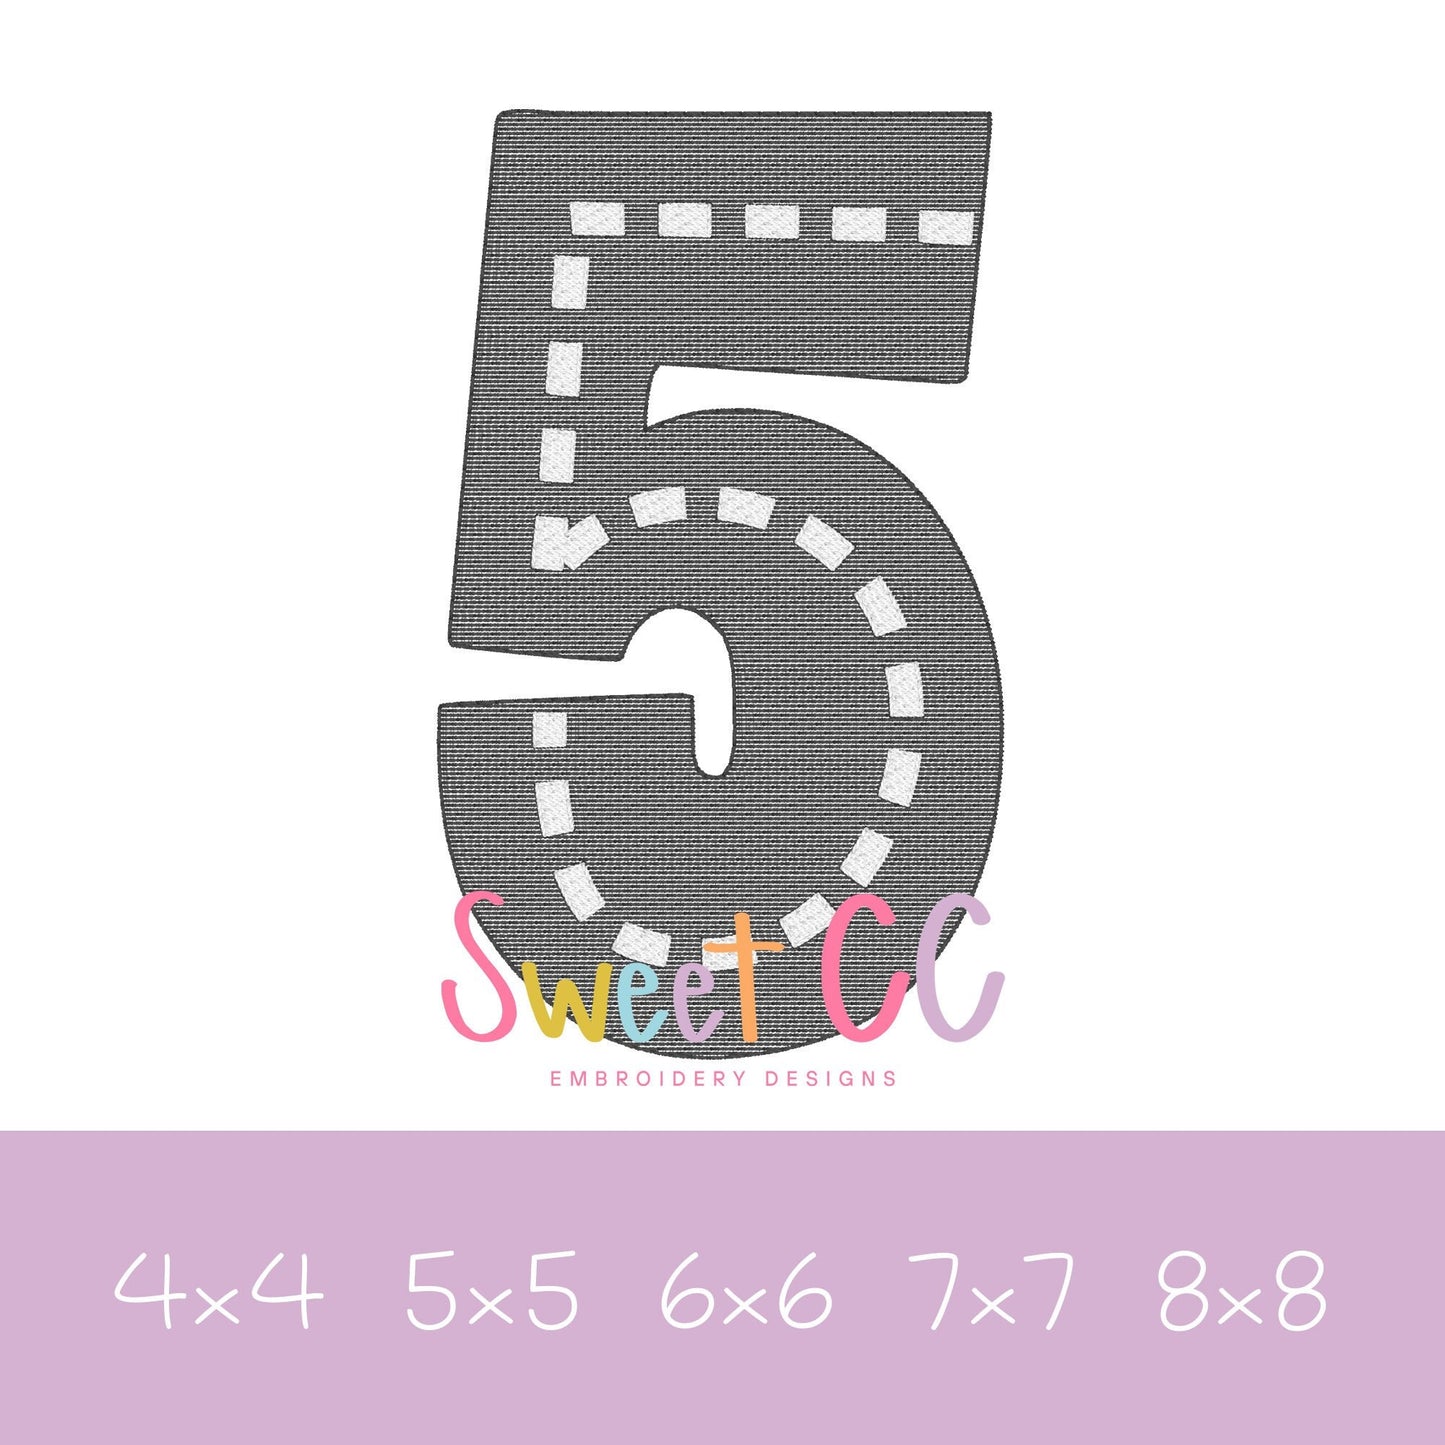 Race Track Number 5 Sketch Stitch Embroidery Design 4x4, 5x5, 6x6, 7x7, 8x8 cars racing go cart